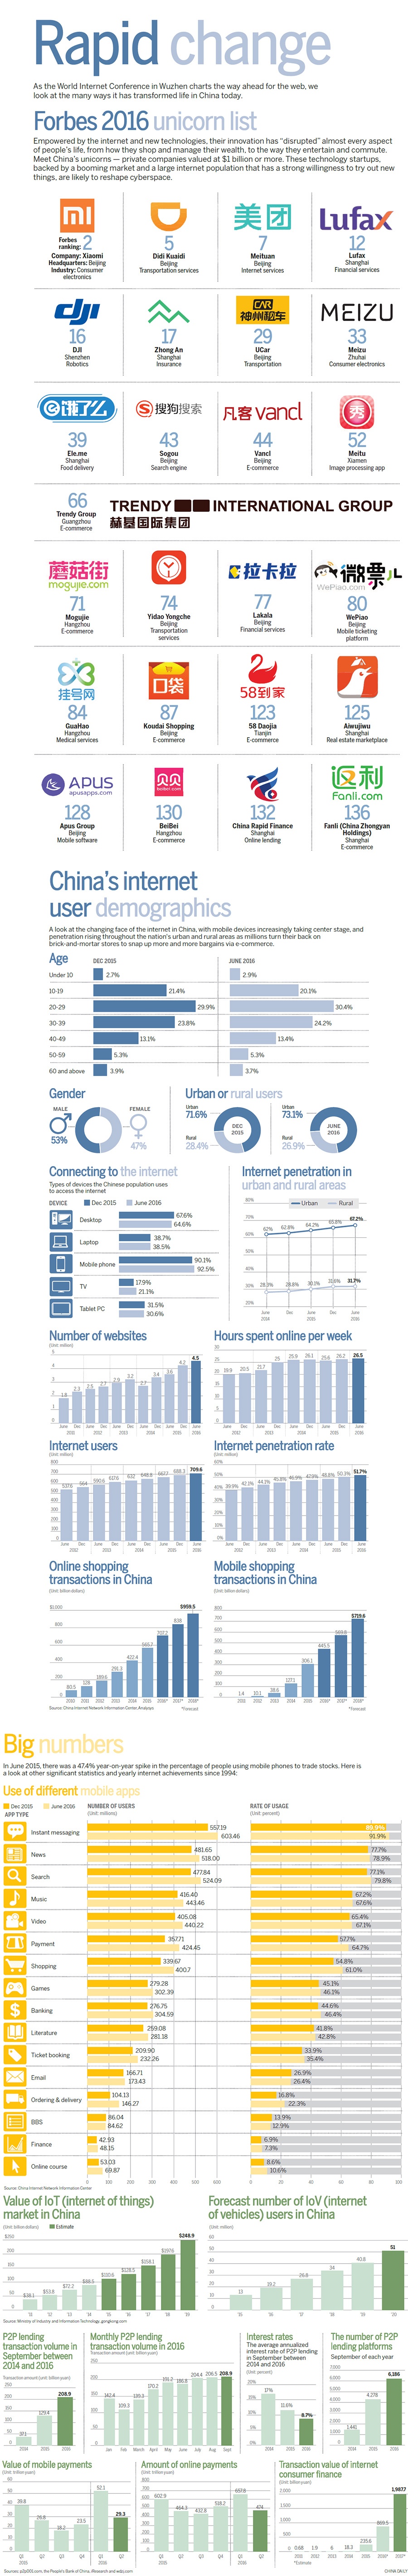 infographic-how-the-internet-has-transformed-china